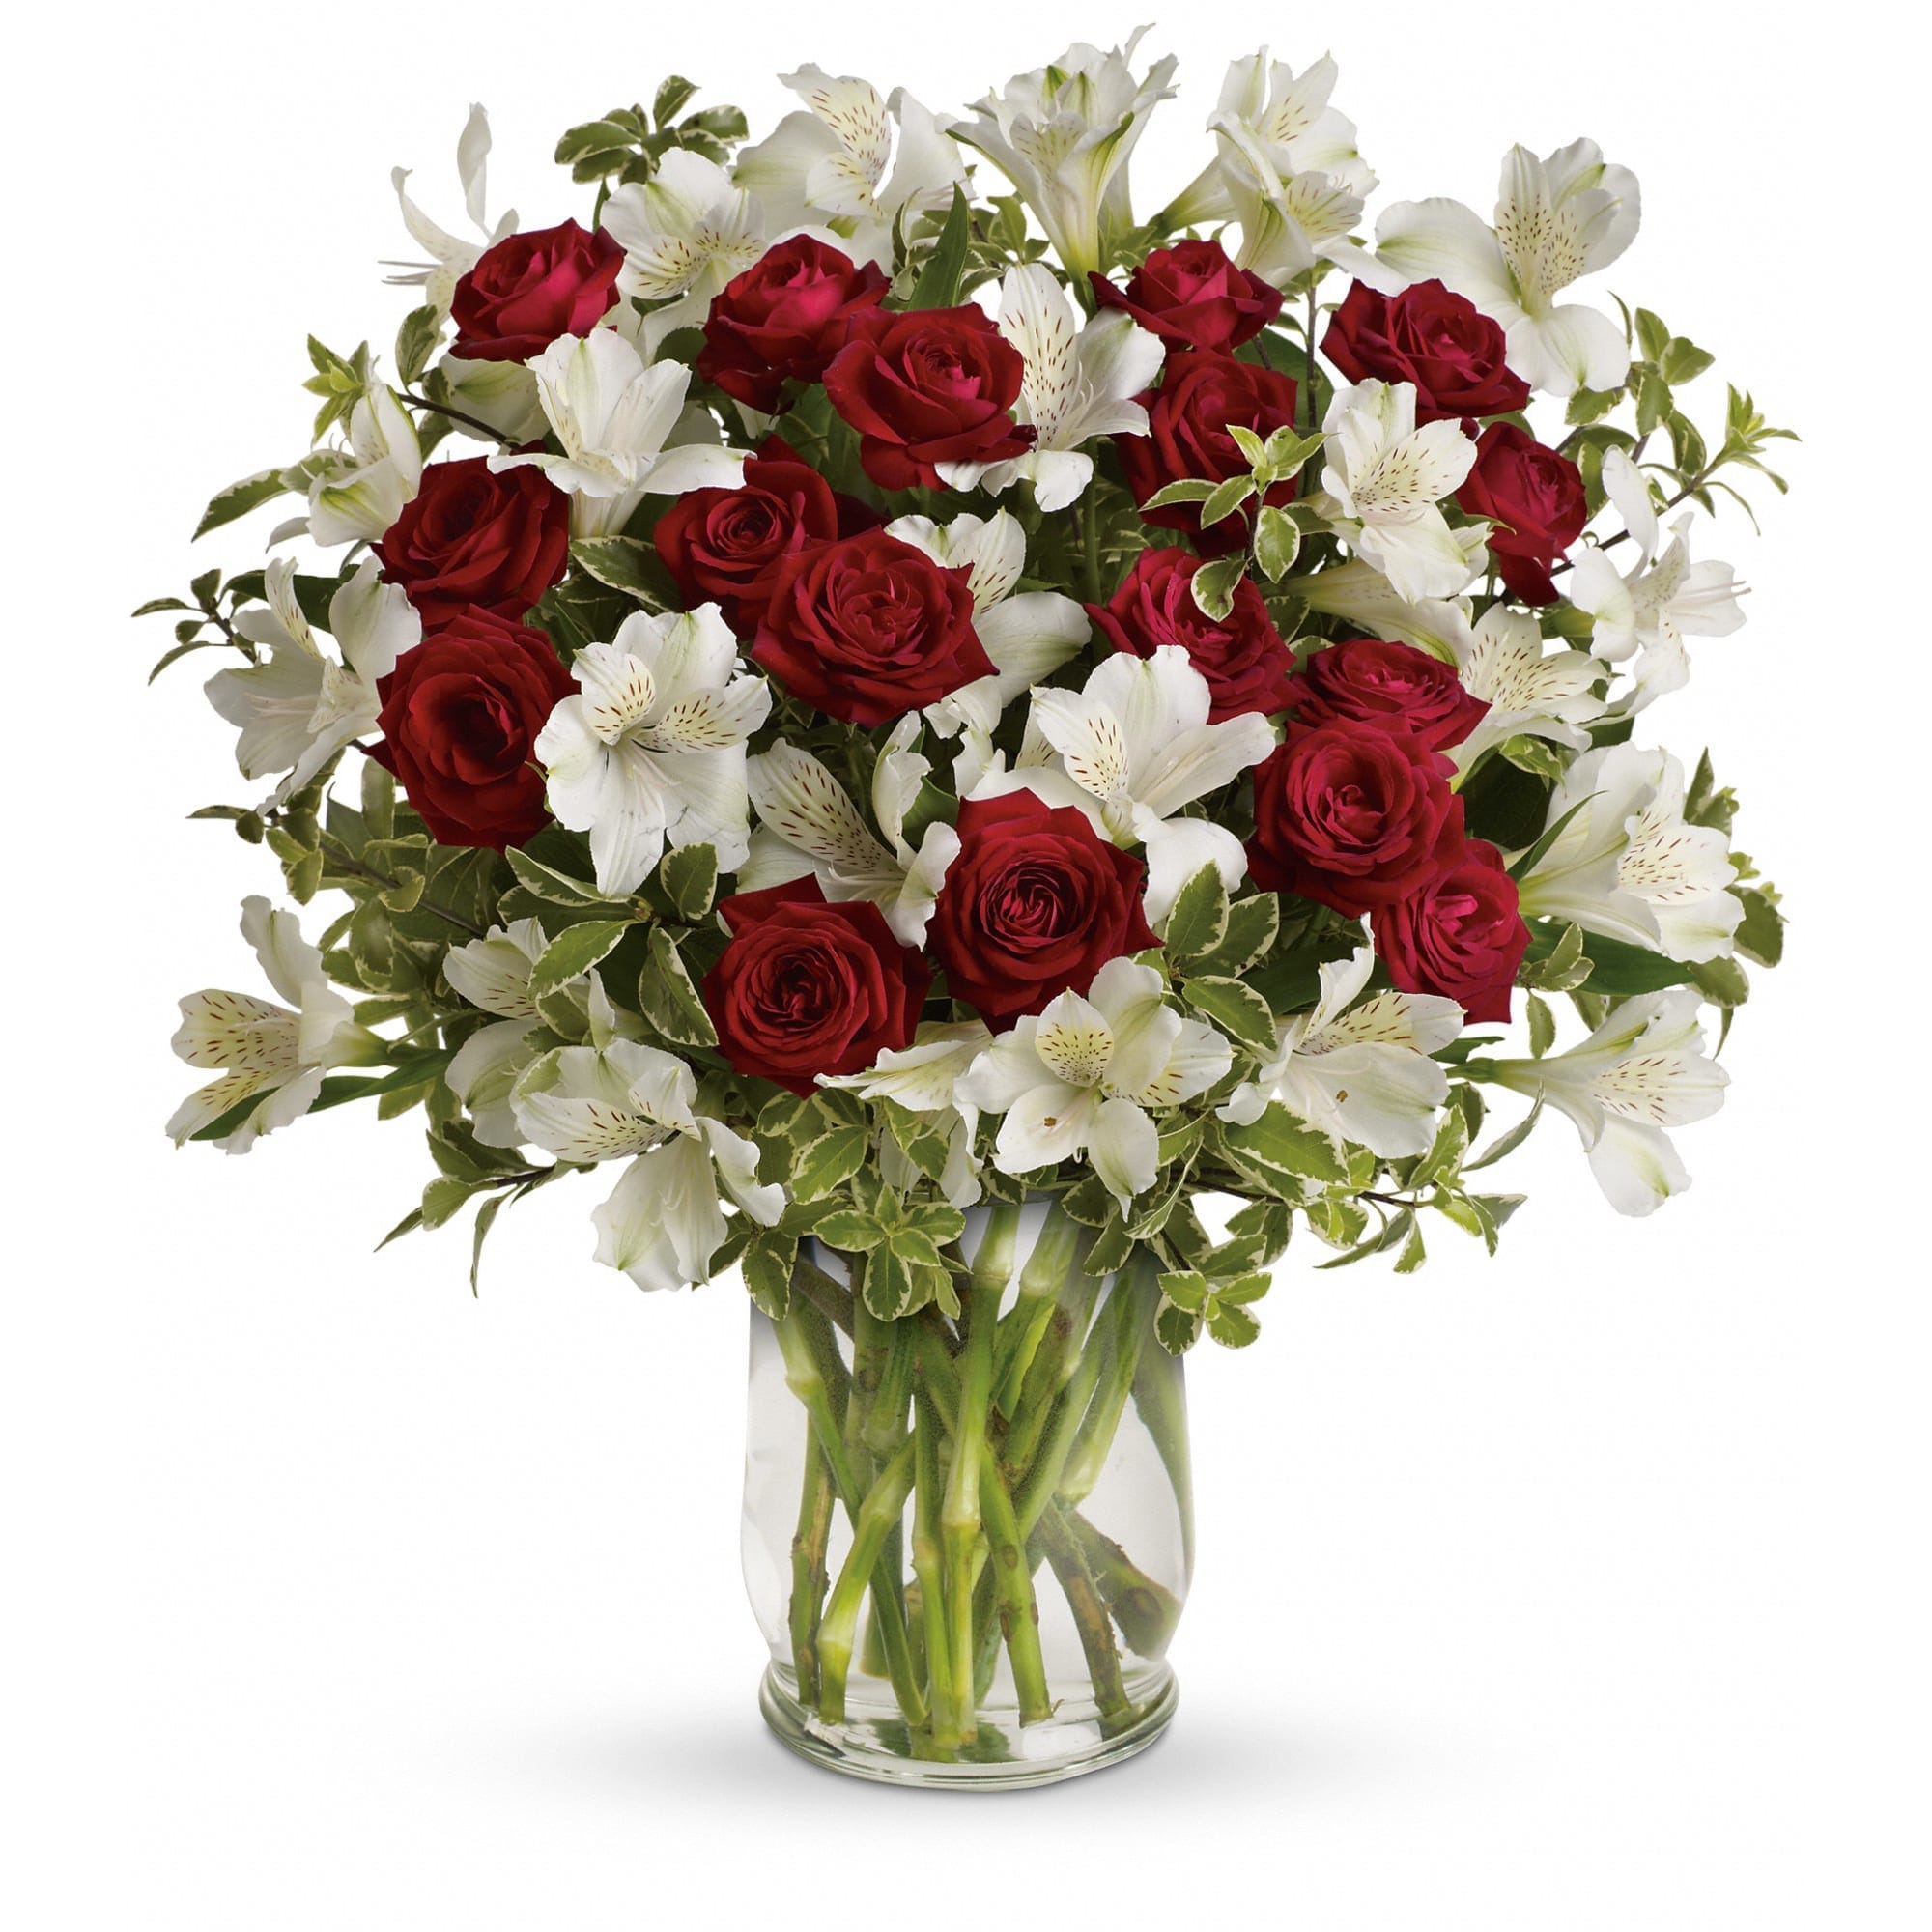 Endless Romance Bouquet by Teleflora - Endless roses, endless romance! Make a statement with our stunning bouquet of red roses with snowy white blossoms, delivered in a glass hurricane vase that will forever remind her of your love.